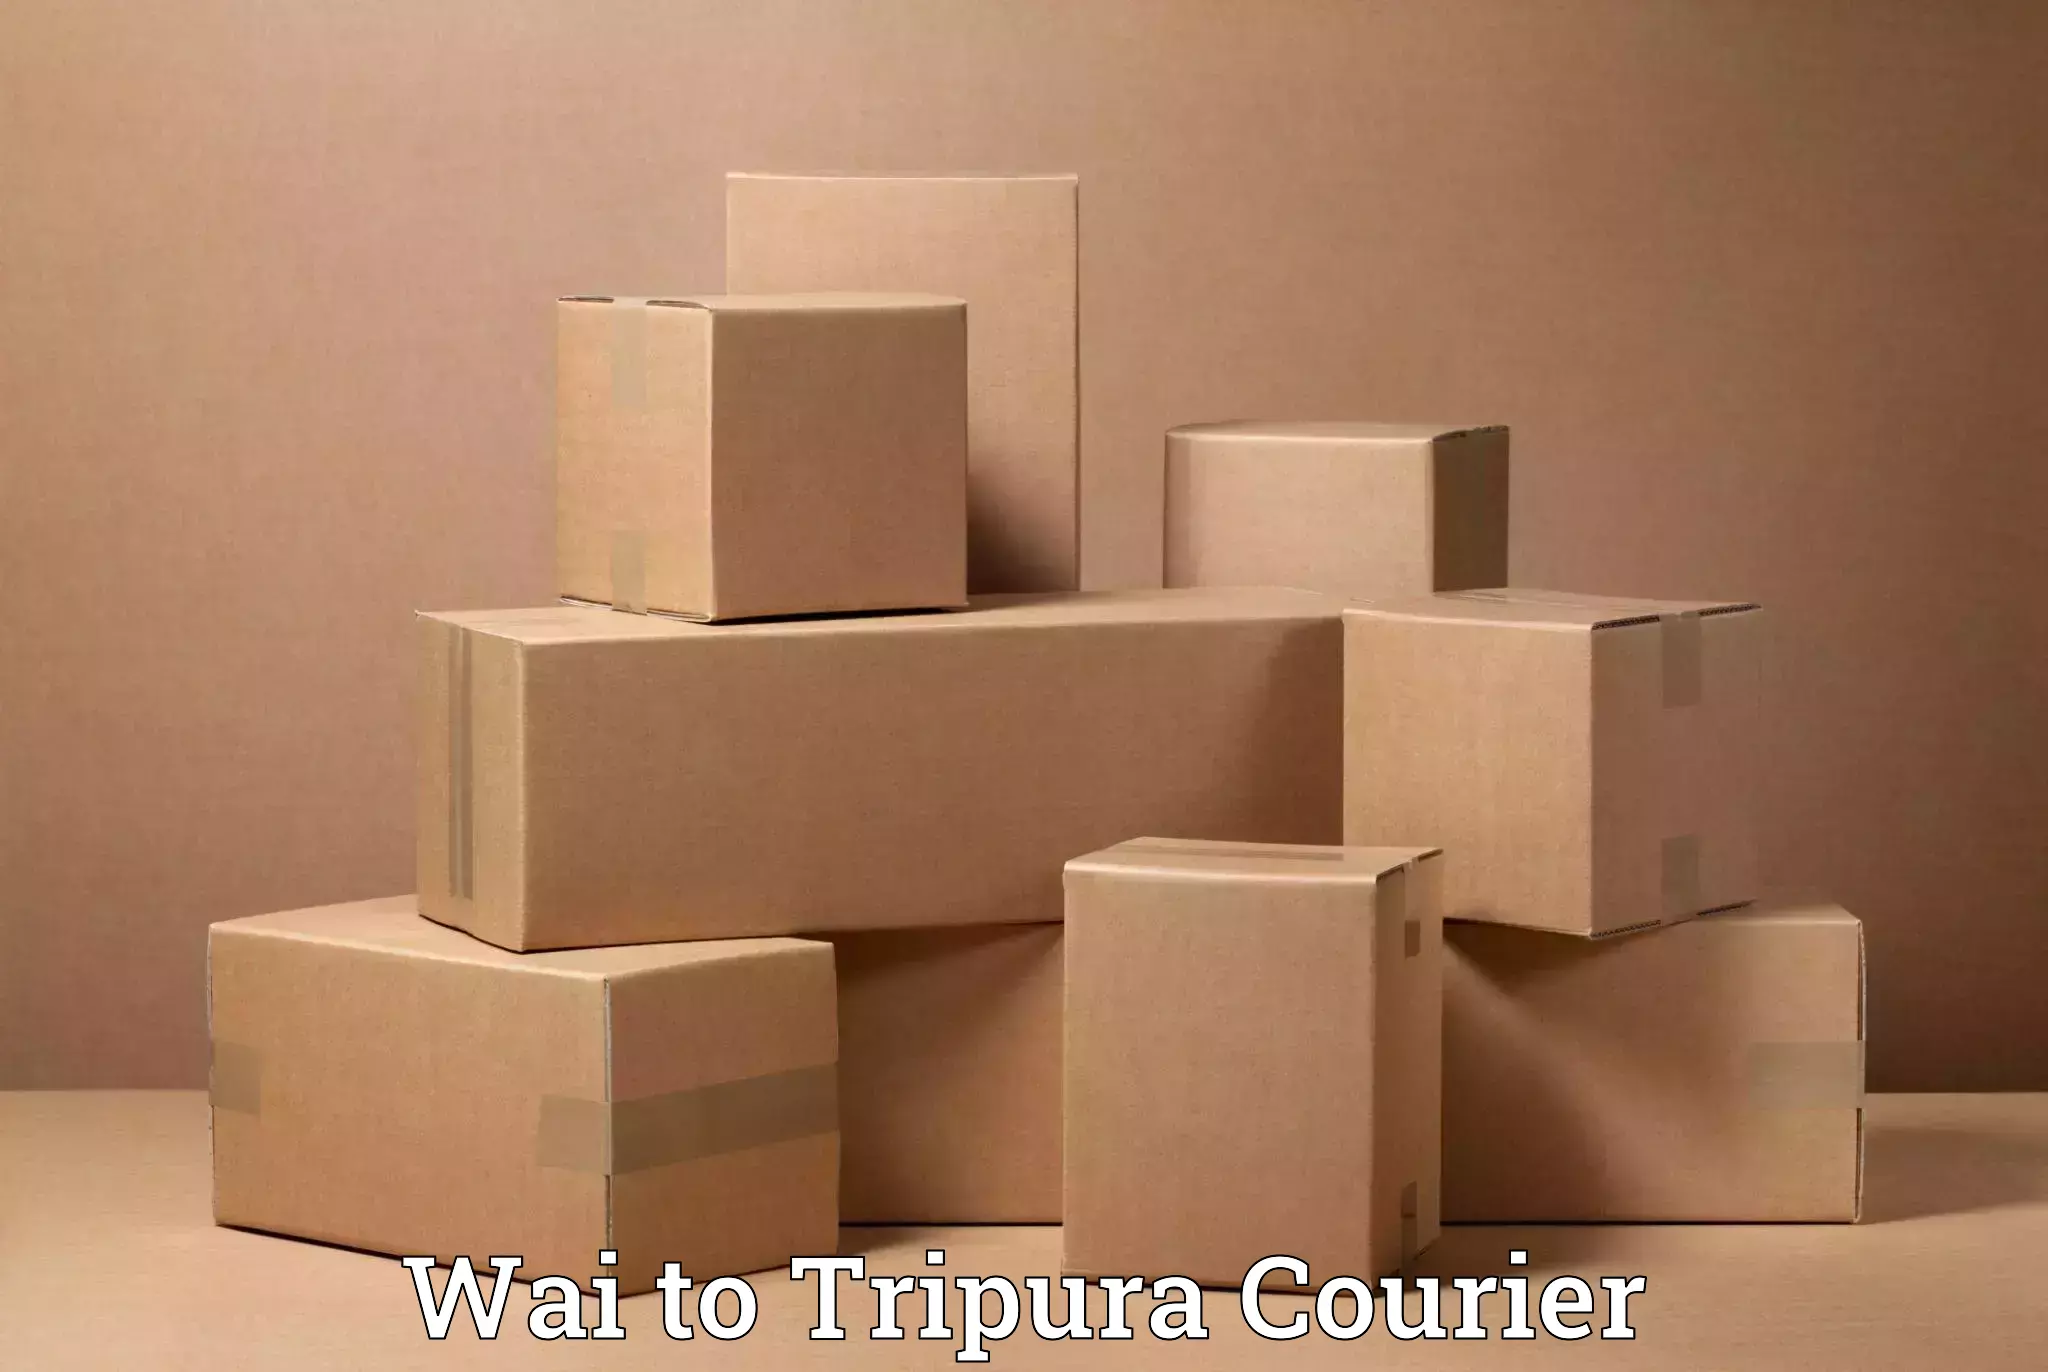 Professional packing and transport Wai to Tripura